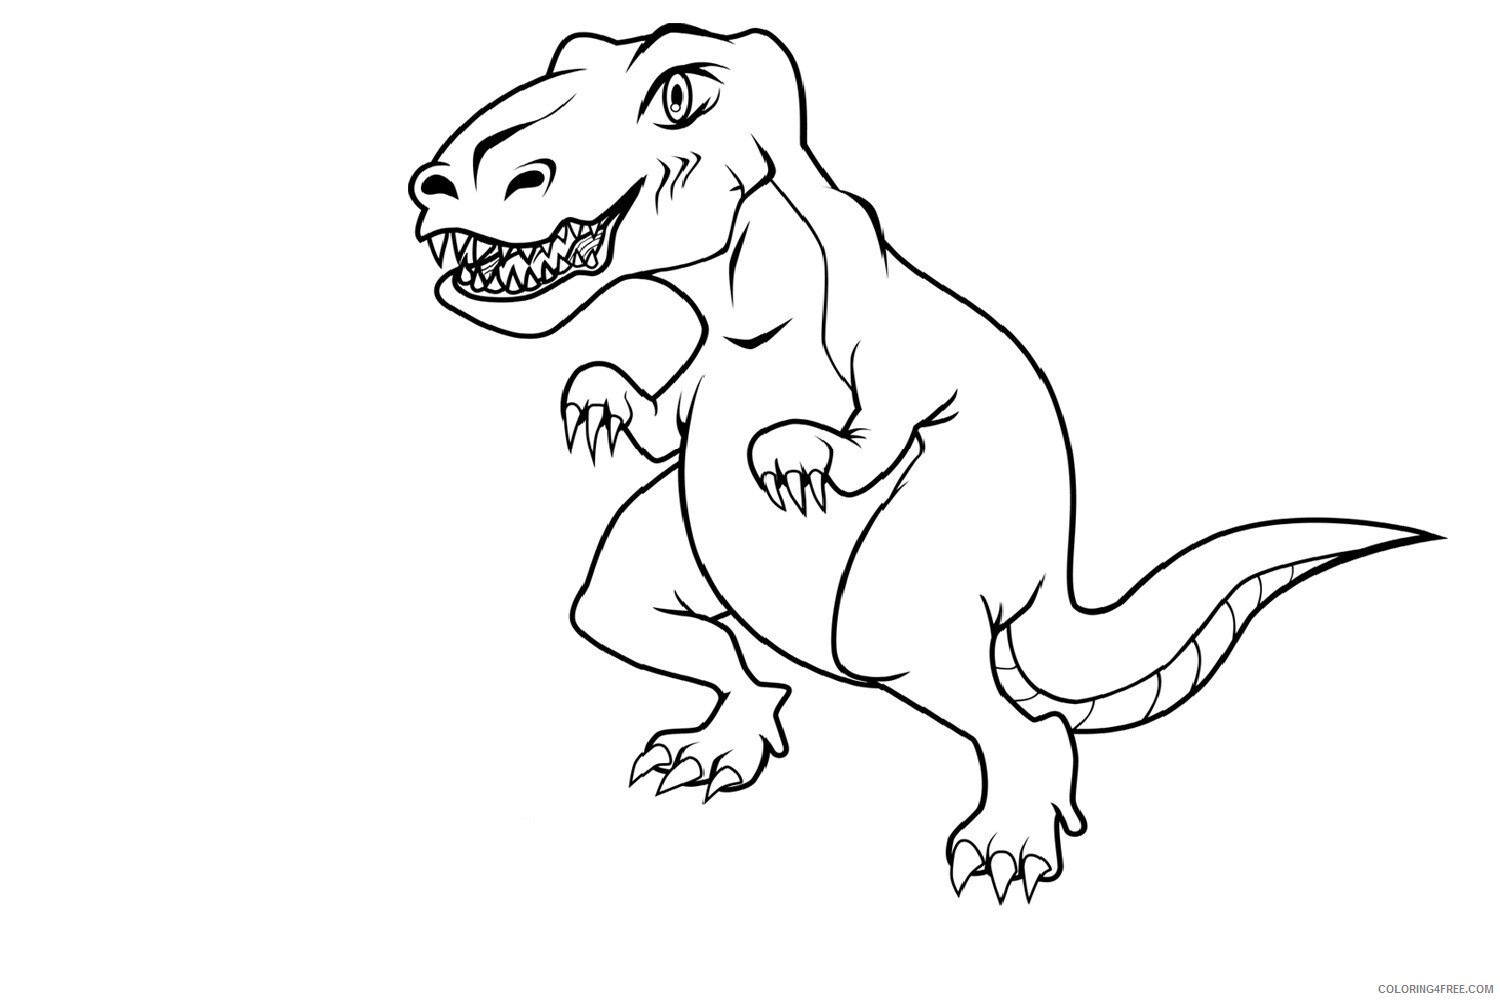 Dinosaurs Coloring Pages for boys Free Dinosaur 2 Printable 2020 0309 Coloring4free